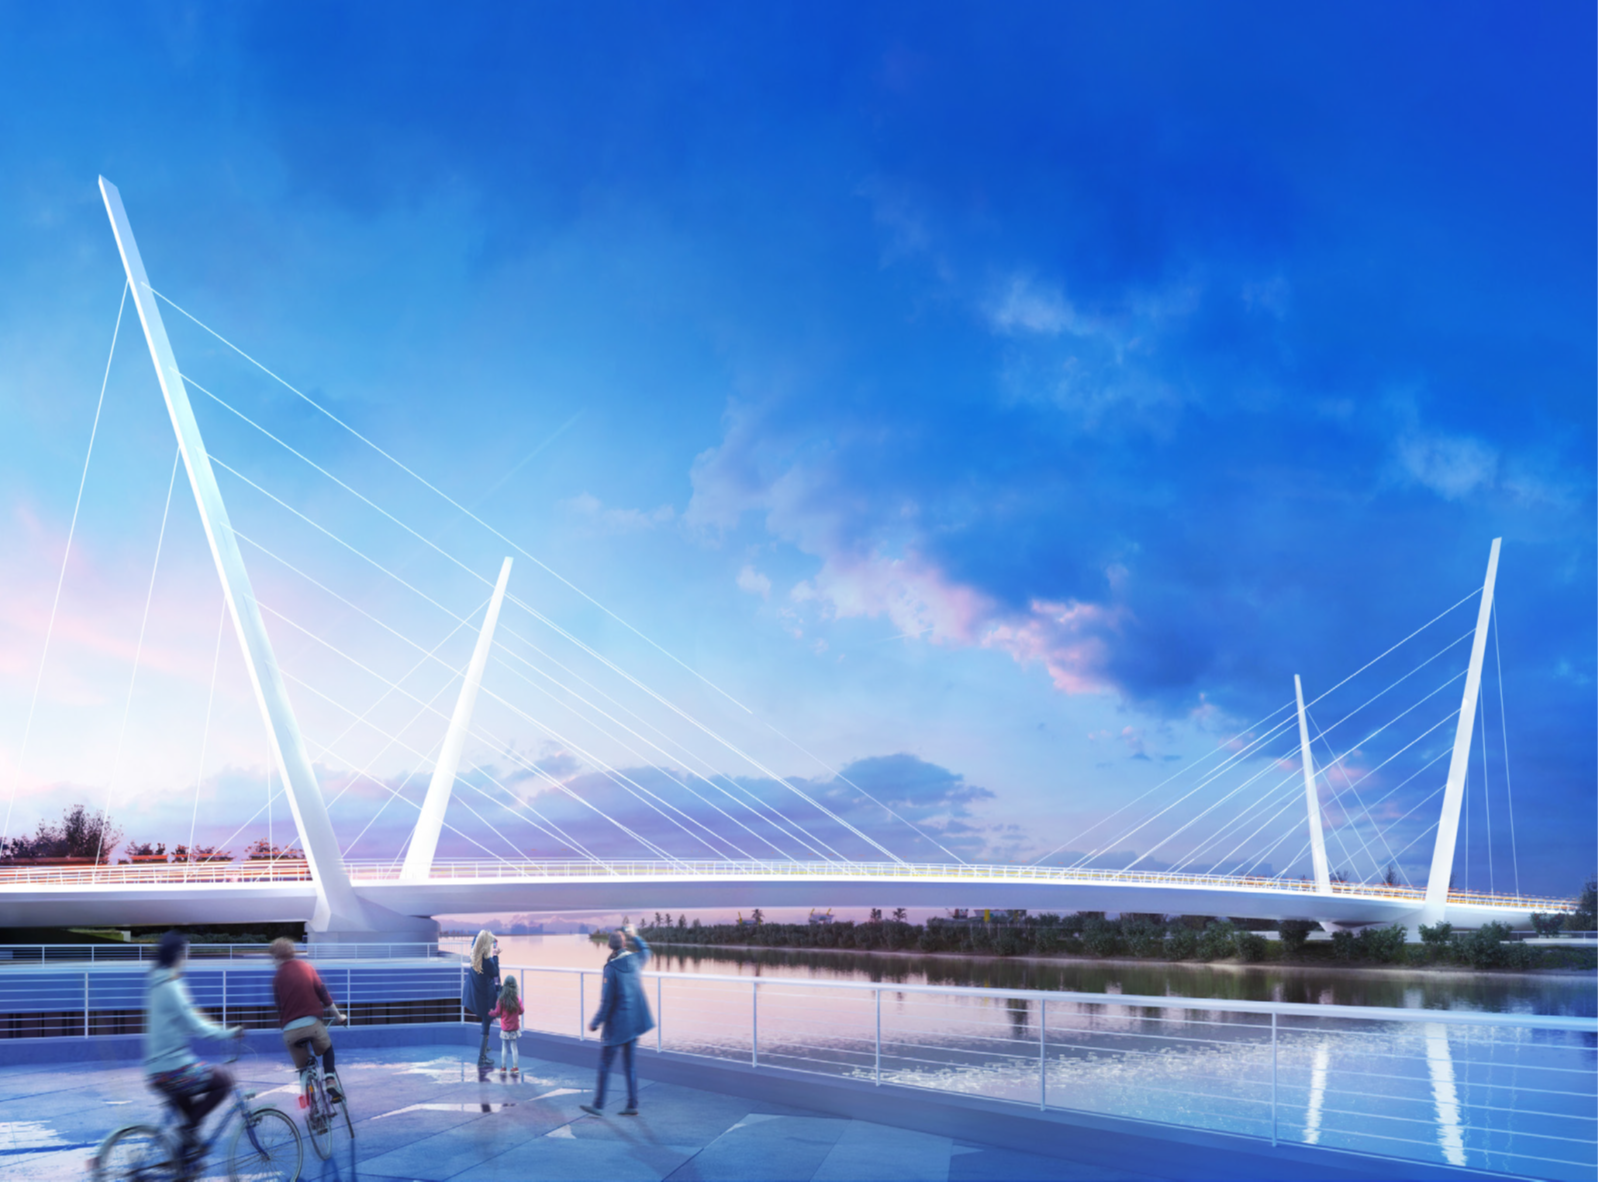 Rendering of the clyde swing bridge CaSE civil and structural engineering project